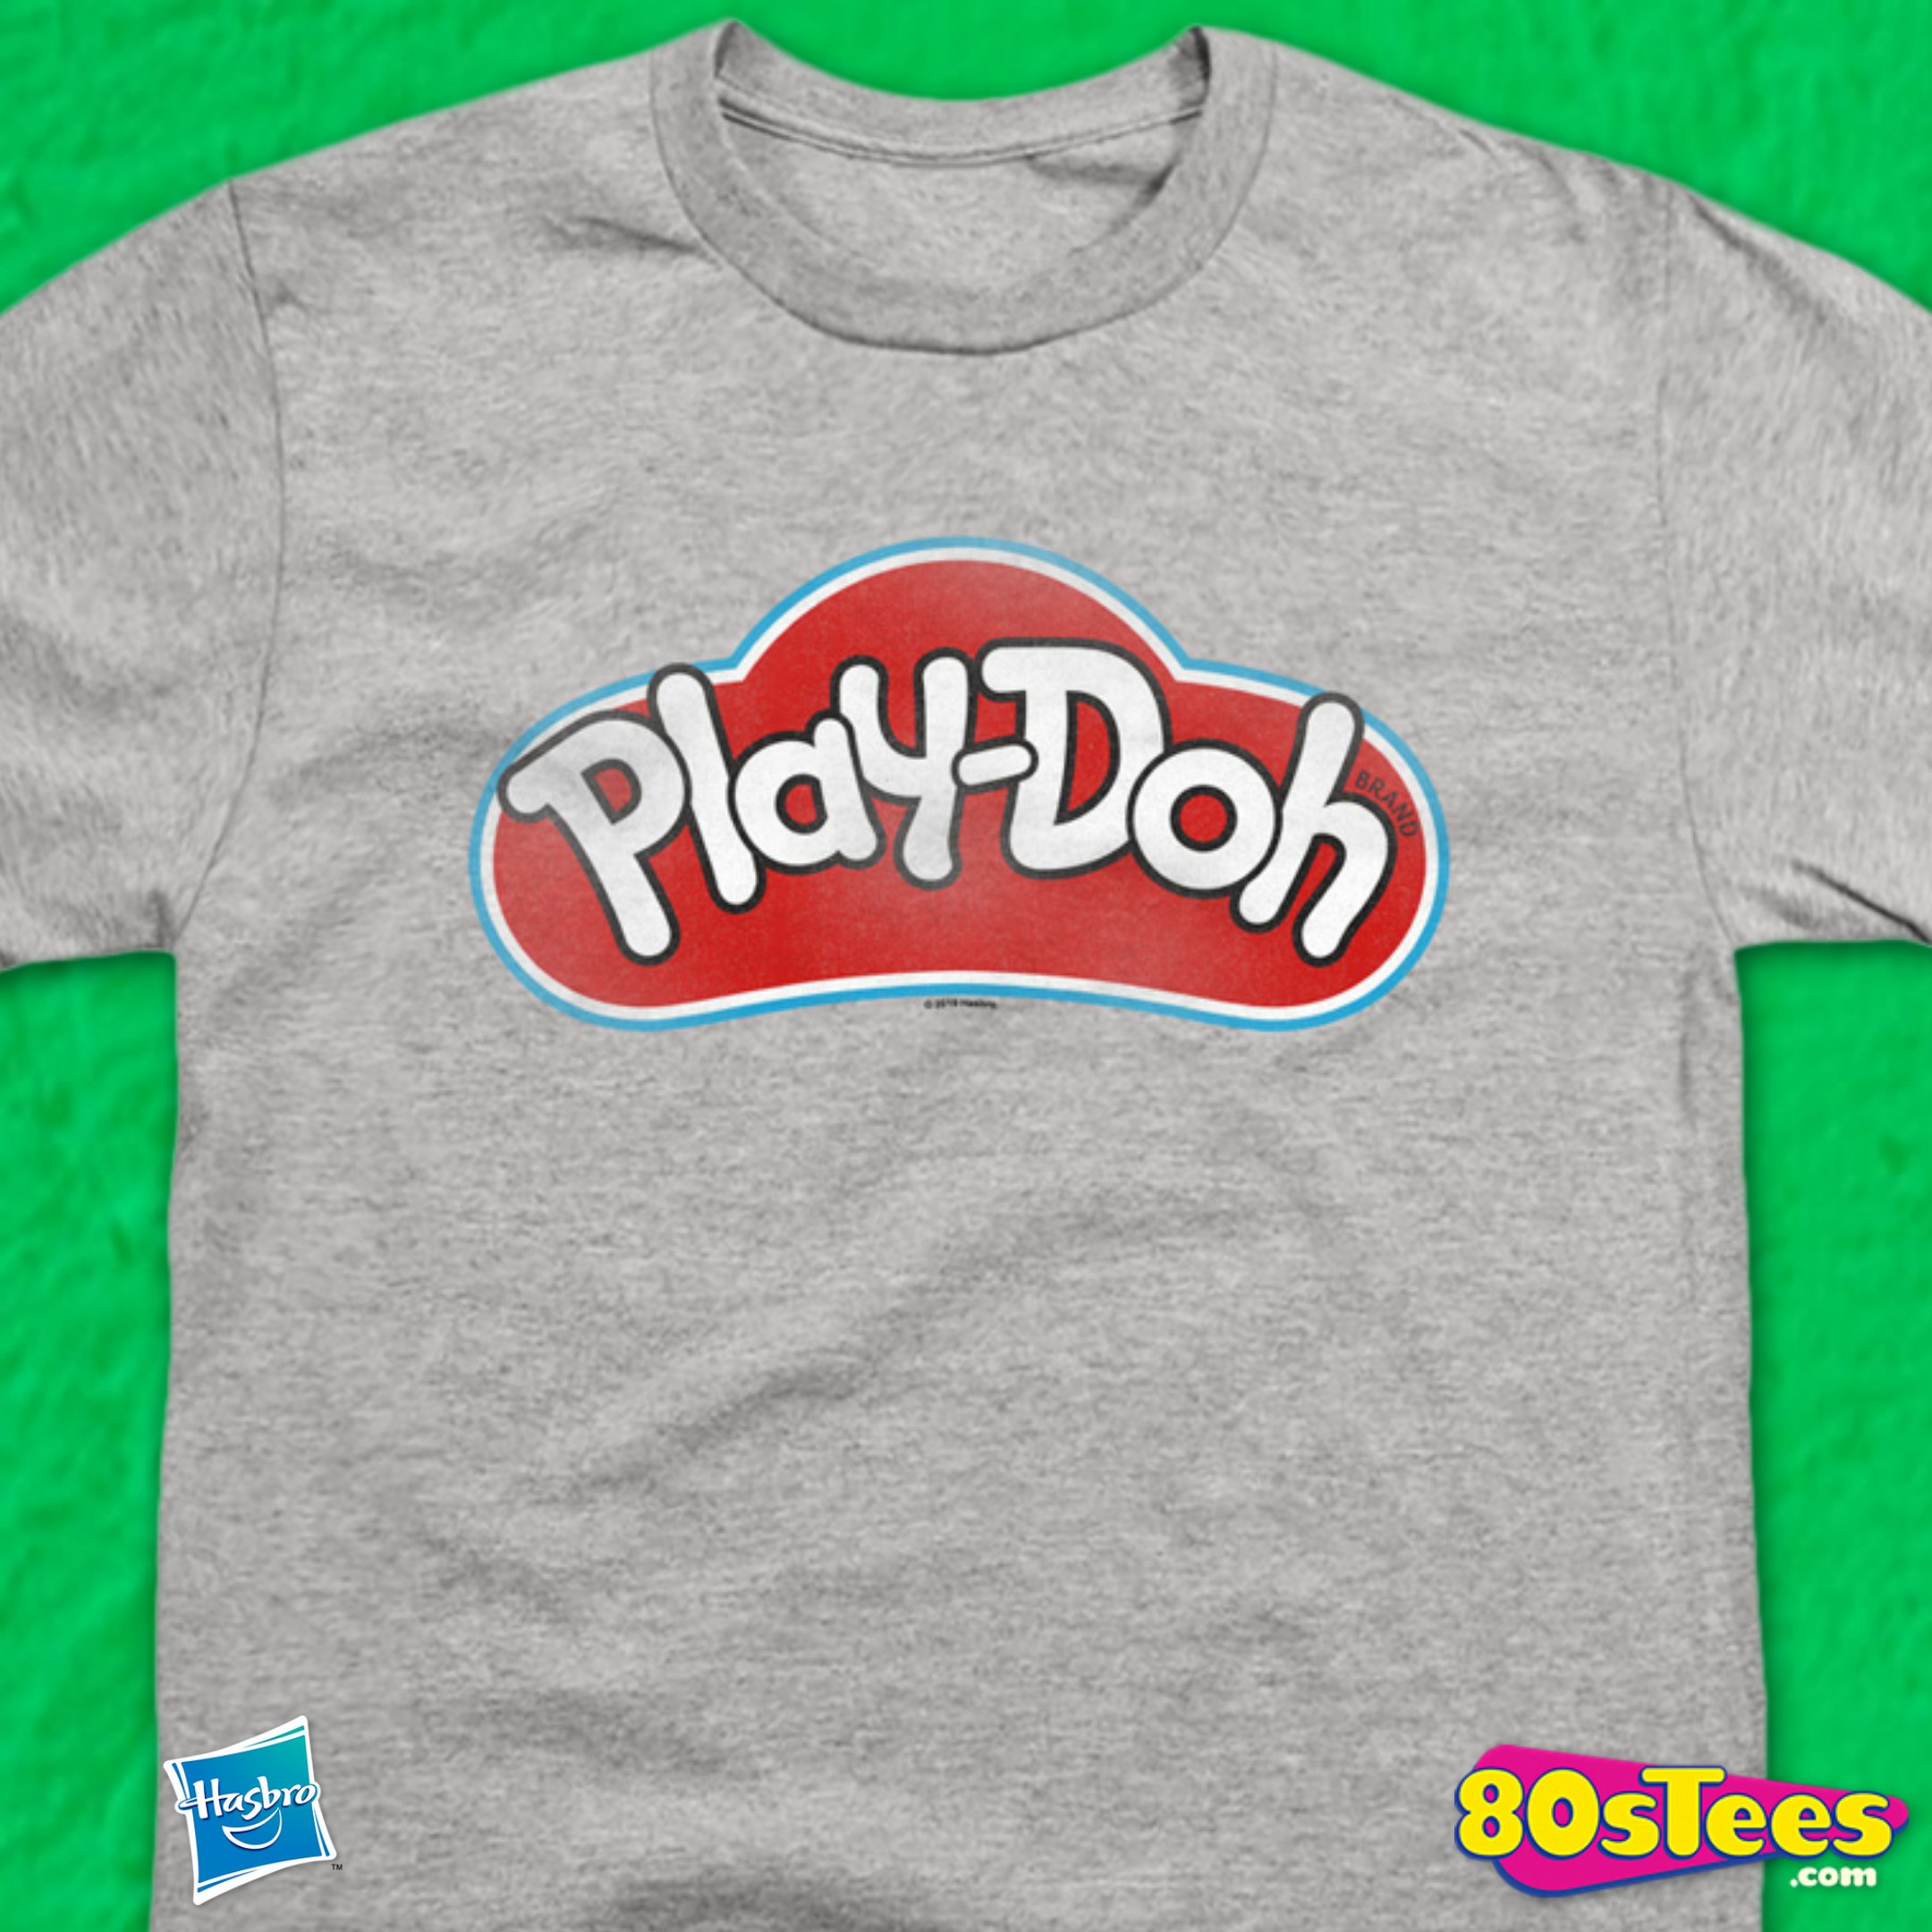 PLAY DOH LOGO Licensed Toddler Kids Graphic Tee Shirt 2T 3T 4T 4 5-6 7 